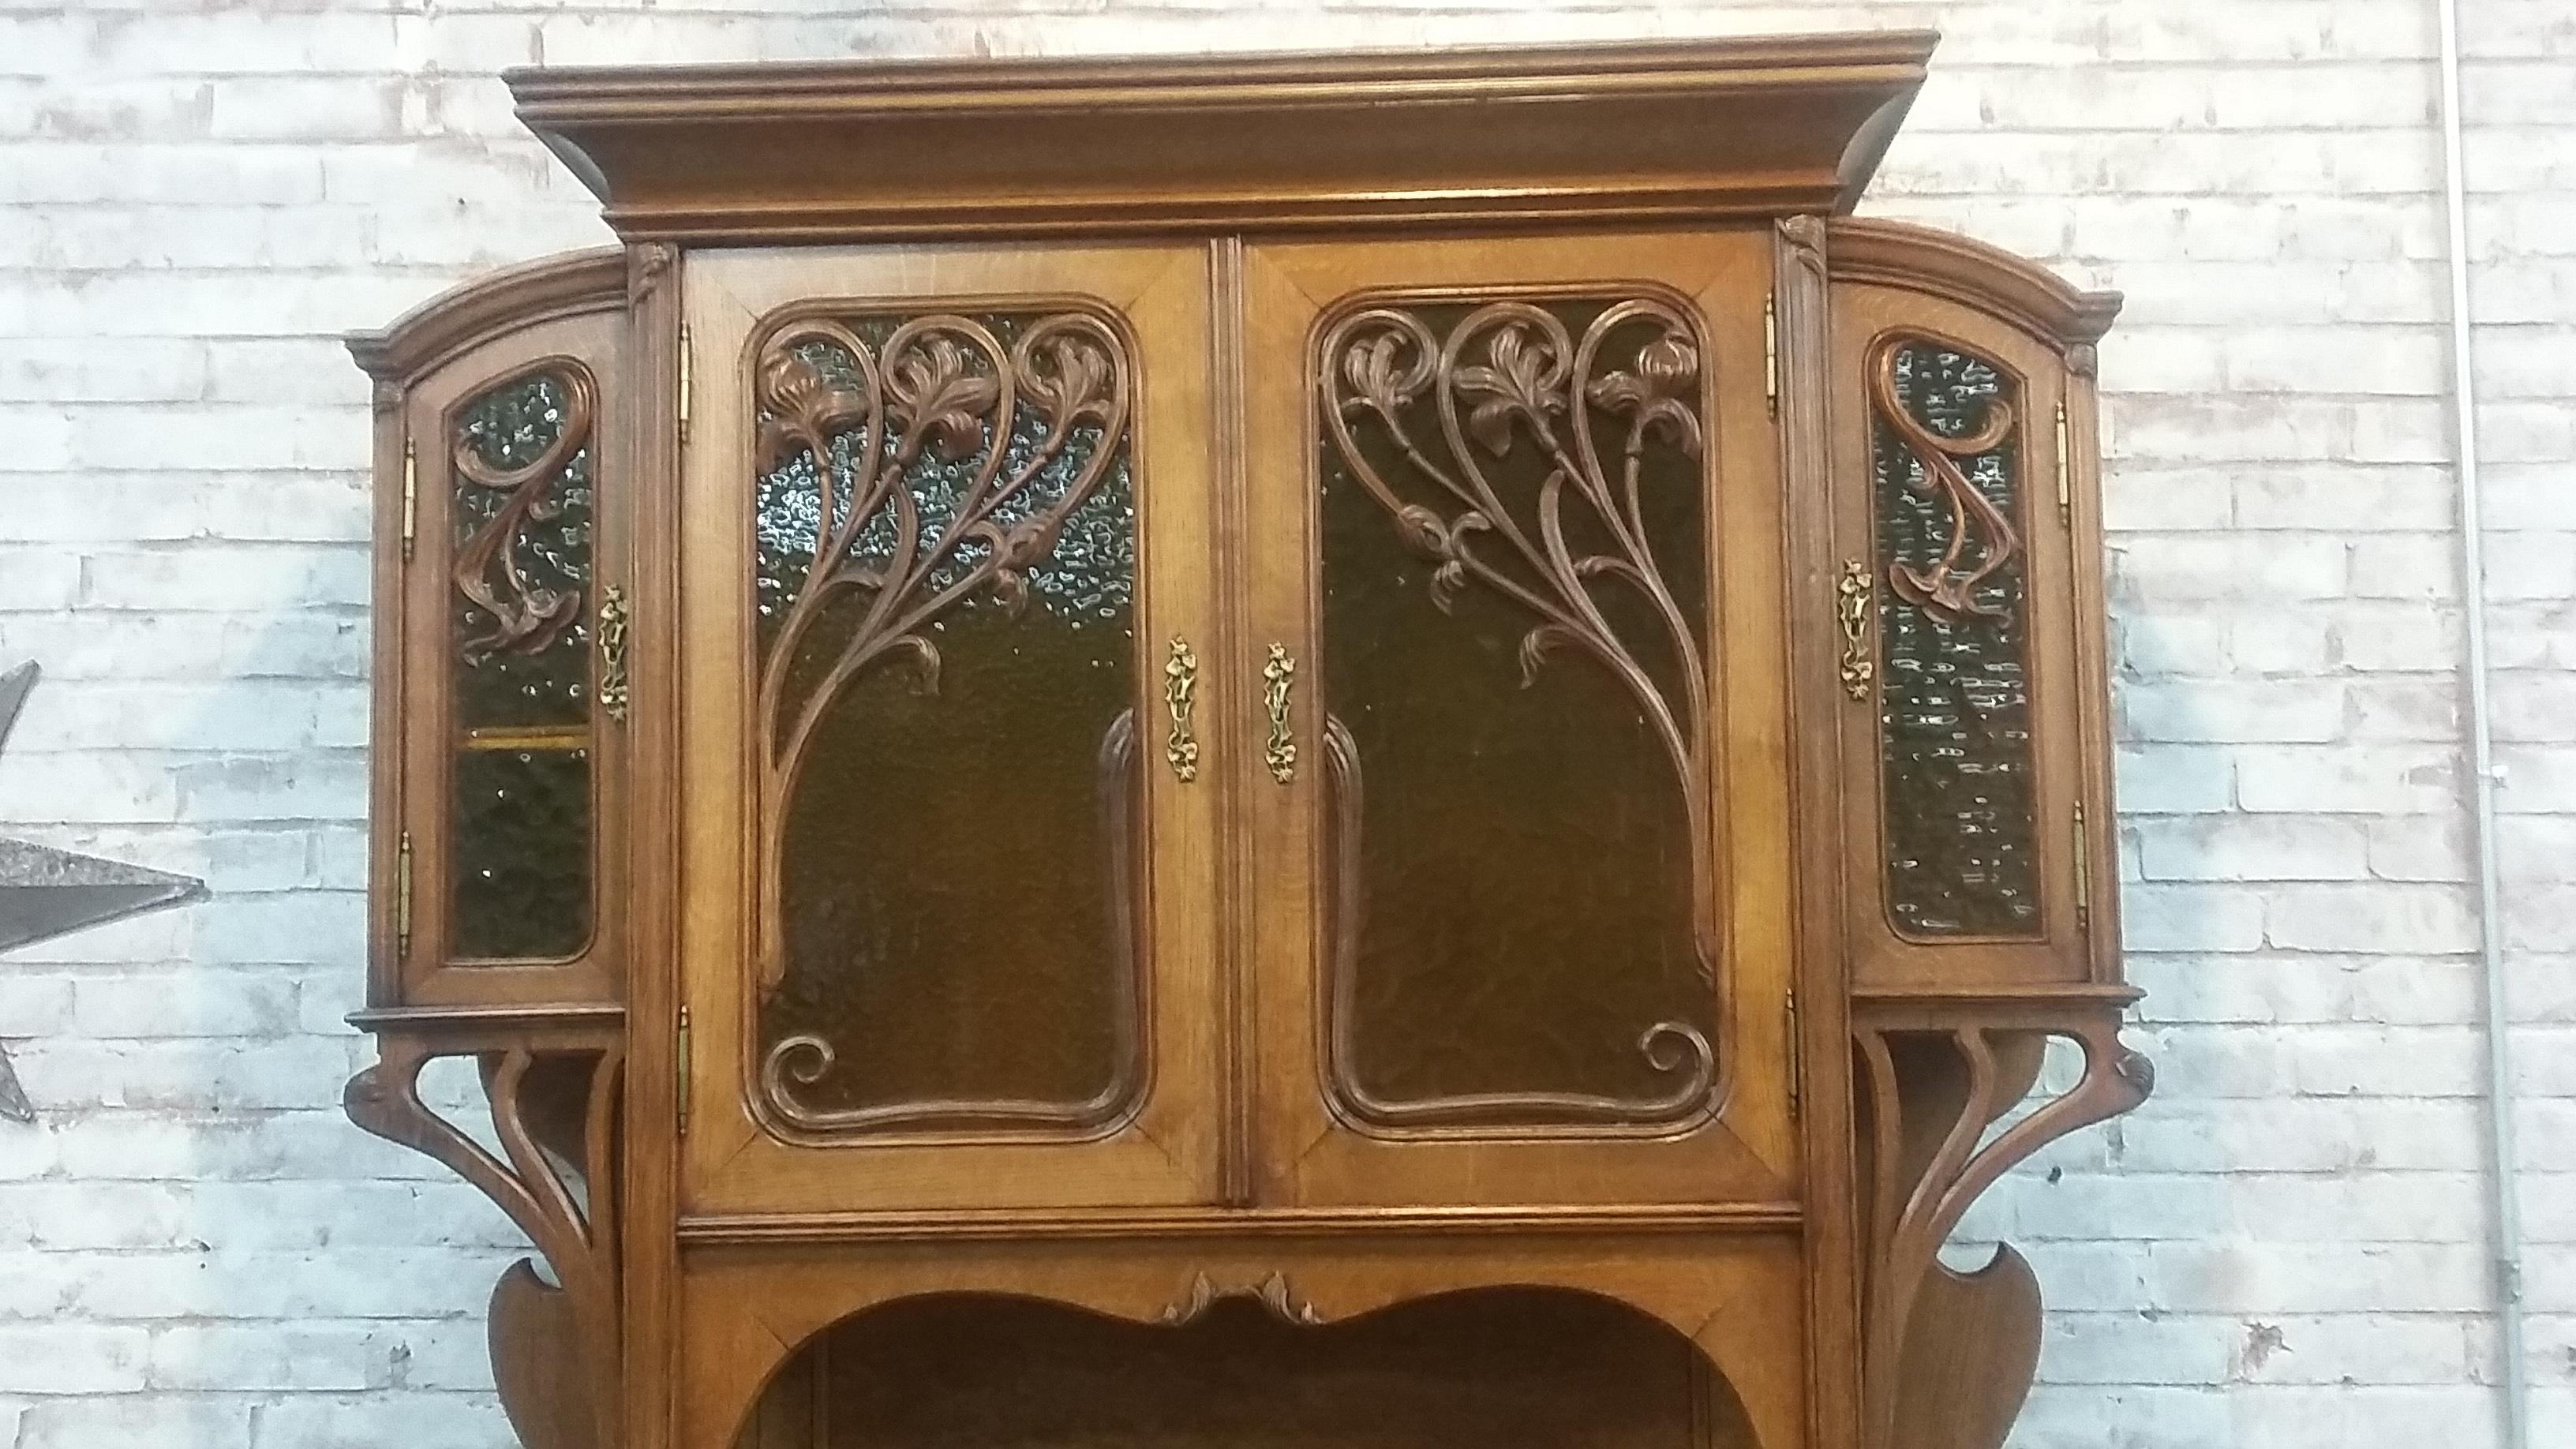 Absolutely beautiful 19th century oak art nouveau cabinet. Great condition. European piece acquired from France. Measures 66 1/2